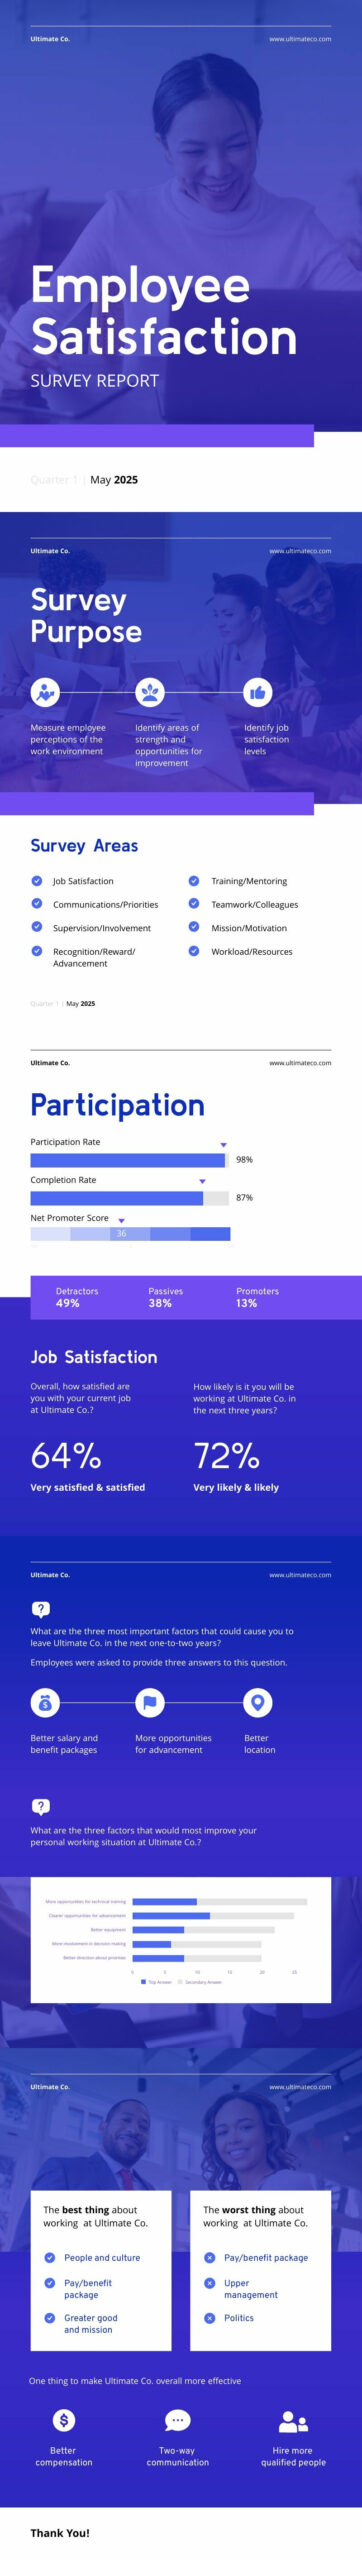 modern report template to present employee engagement survey result that measures employee experience